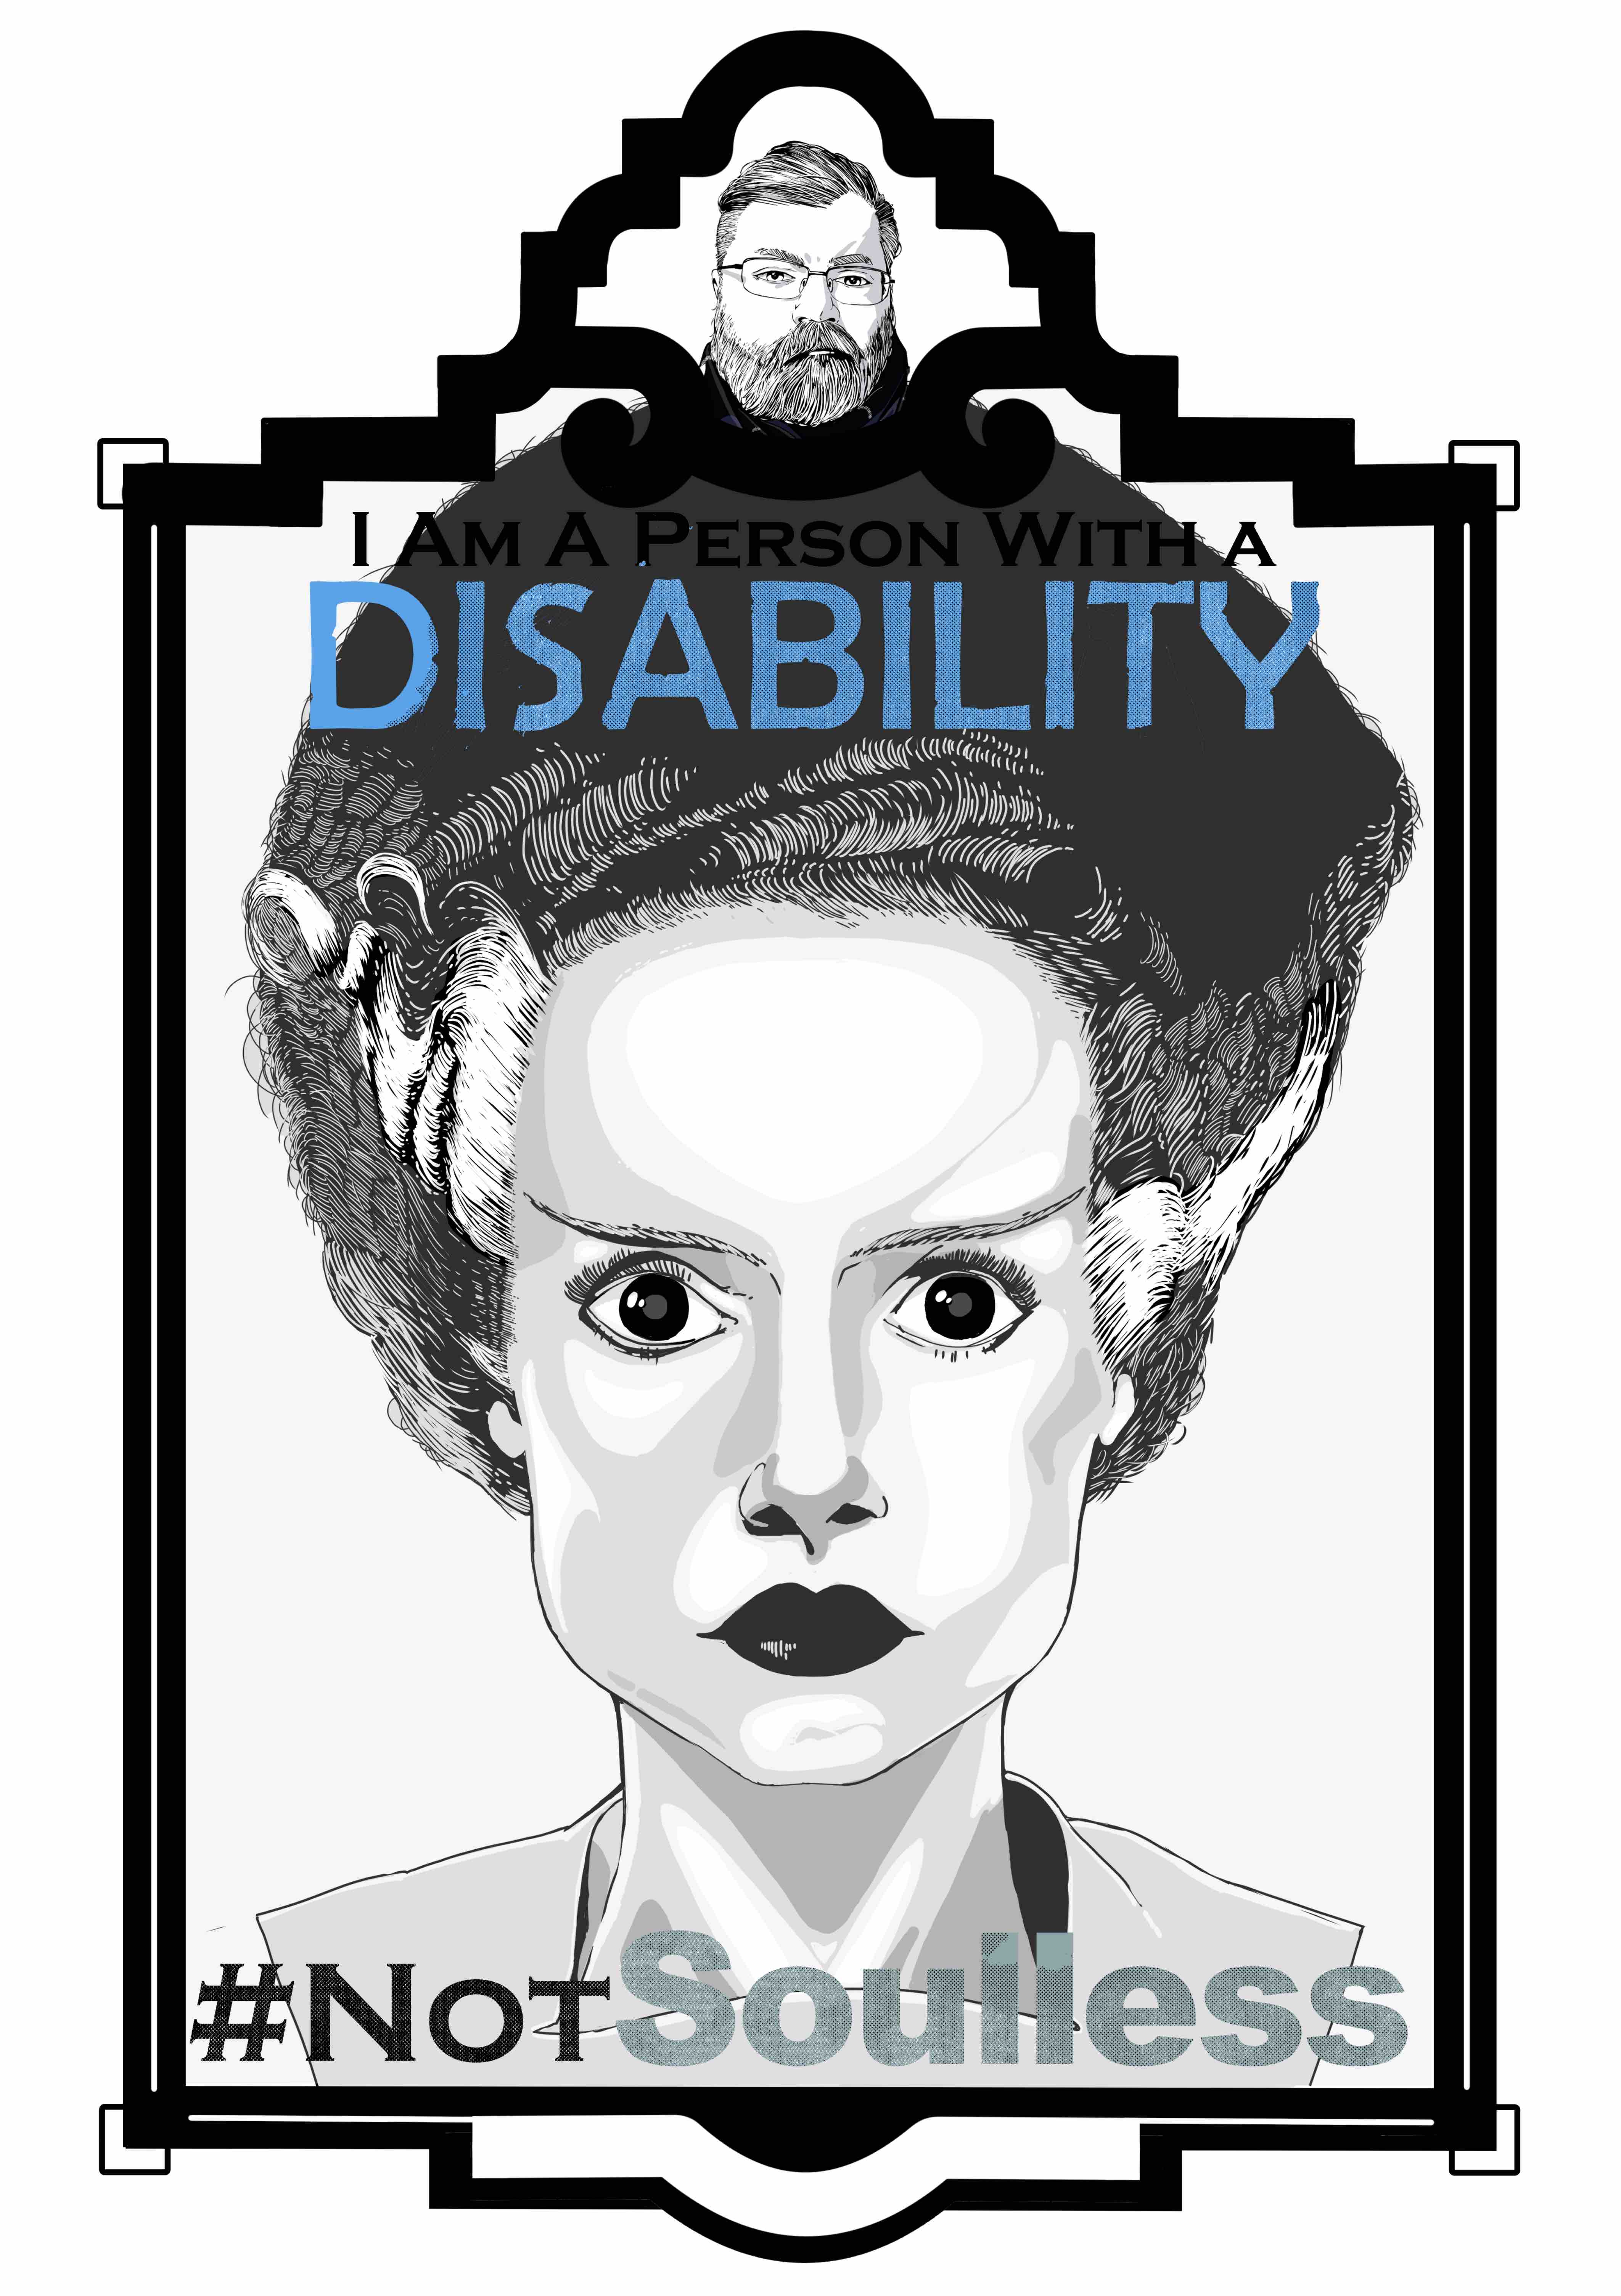 An illustration of the Bride of Frankenstein from the neck up in an art deco frame. The frame consists of a small marquee at the top with an image of the artist and the main image below. The text “I am a person with a disability.’ Sits at the top of the illustration. The word “Disability” is in all caps and is colored blue. The text “# Not Soulless” is at the bottom of the illustration with the text “soulless” in all caps and colored pail blue/grey. The bride has a stone-faced stare with black eyes. its hair is thin and Wiry. Two strips of white hair go from its temples to the back of its head. Its face is thin with grey contour shading.